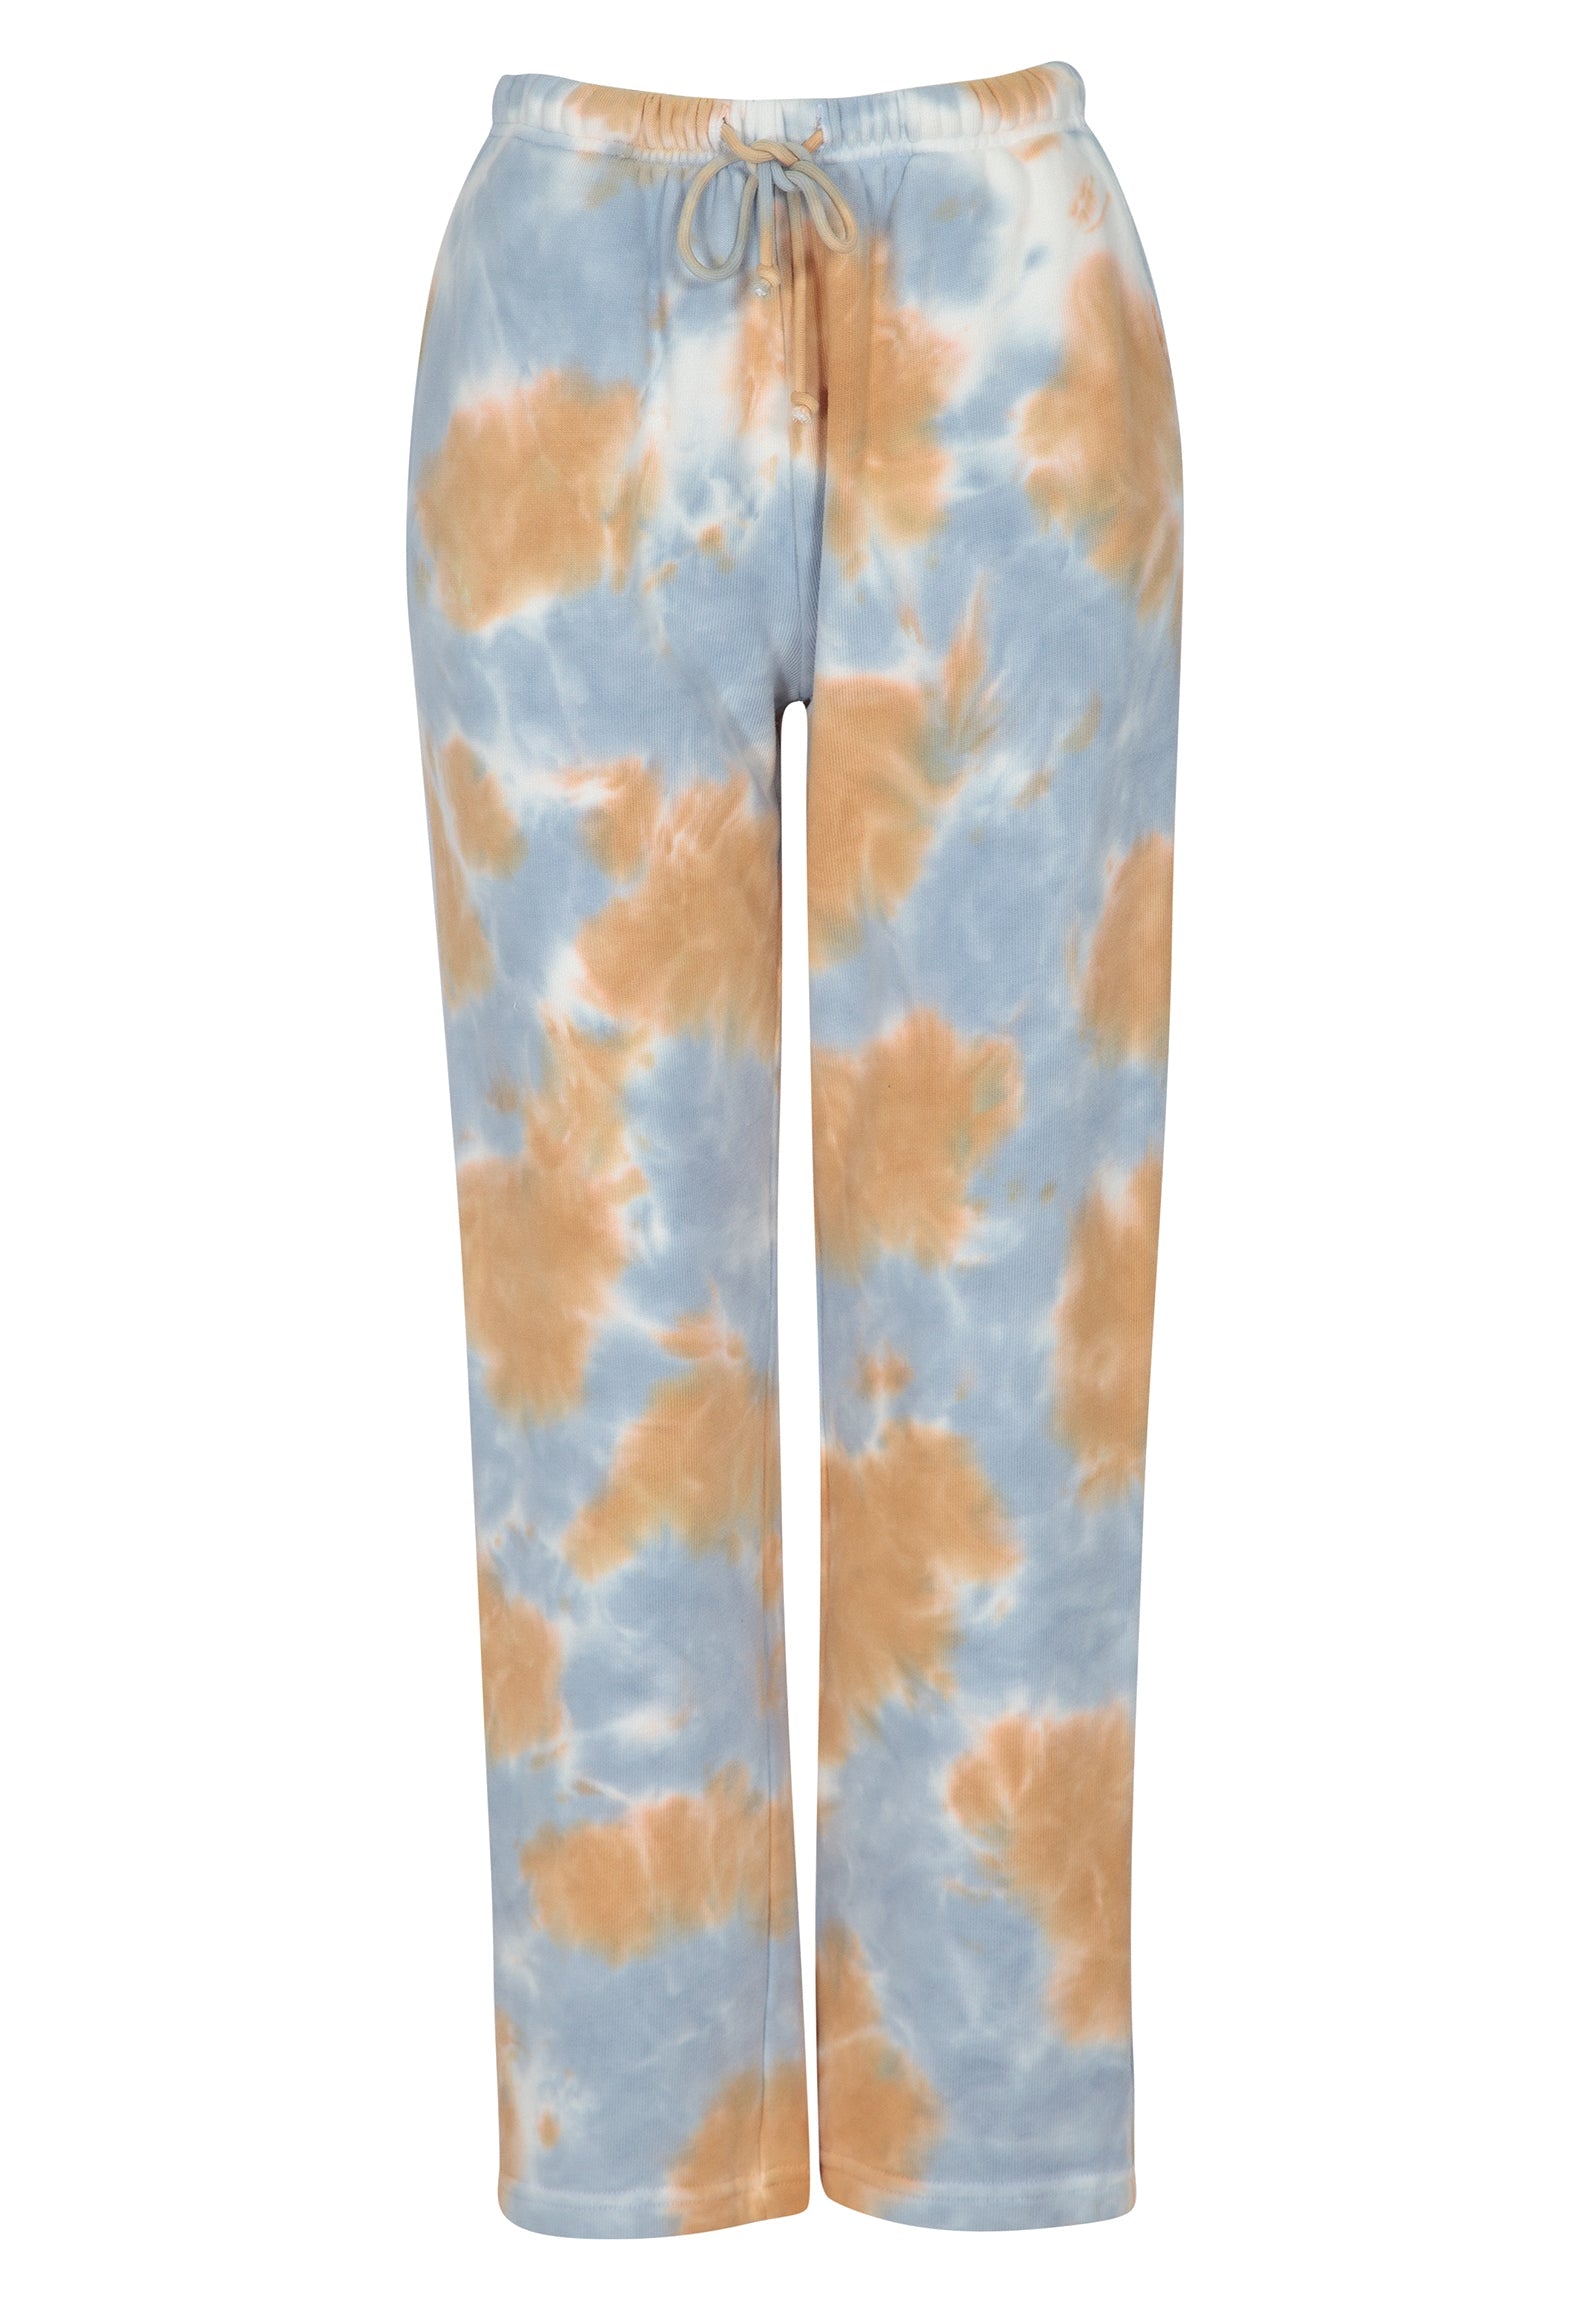 Mimi Pant - Sky Blue Tie Dye-Pants-By RIDLEY-The Bay Room